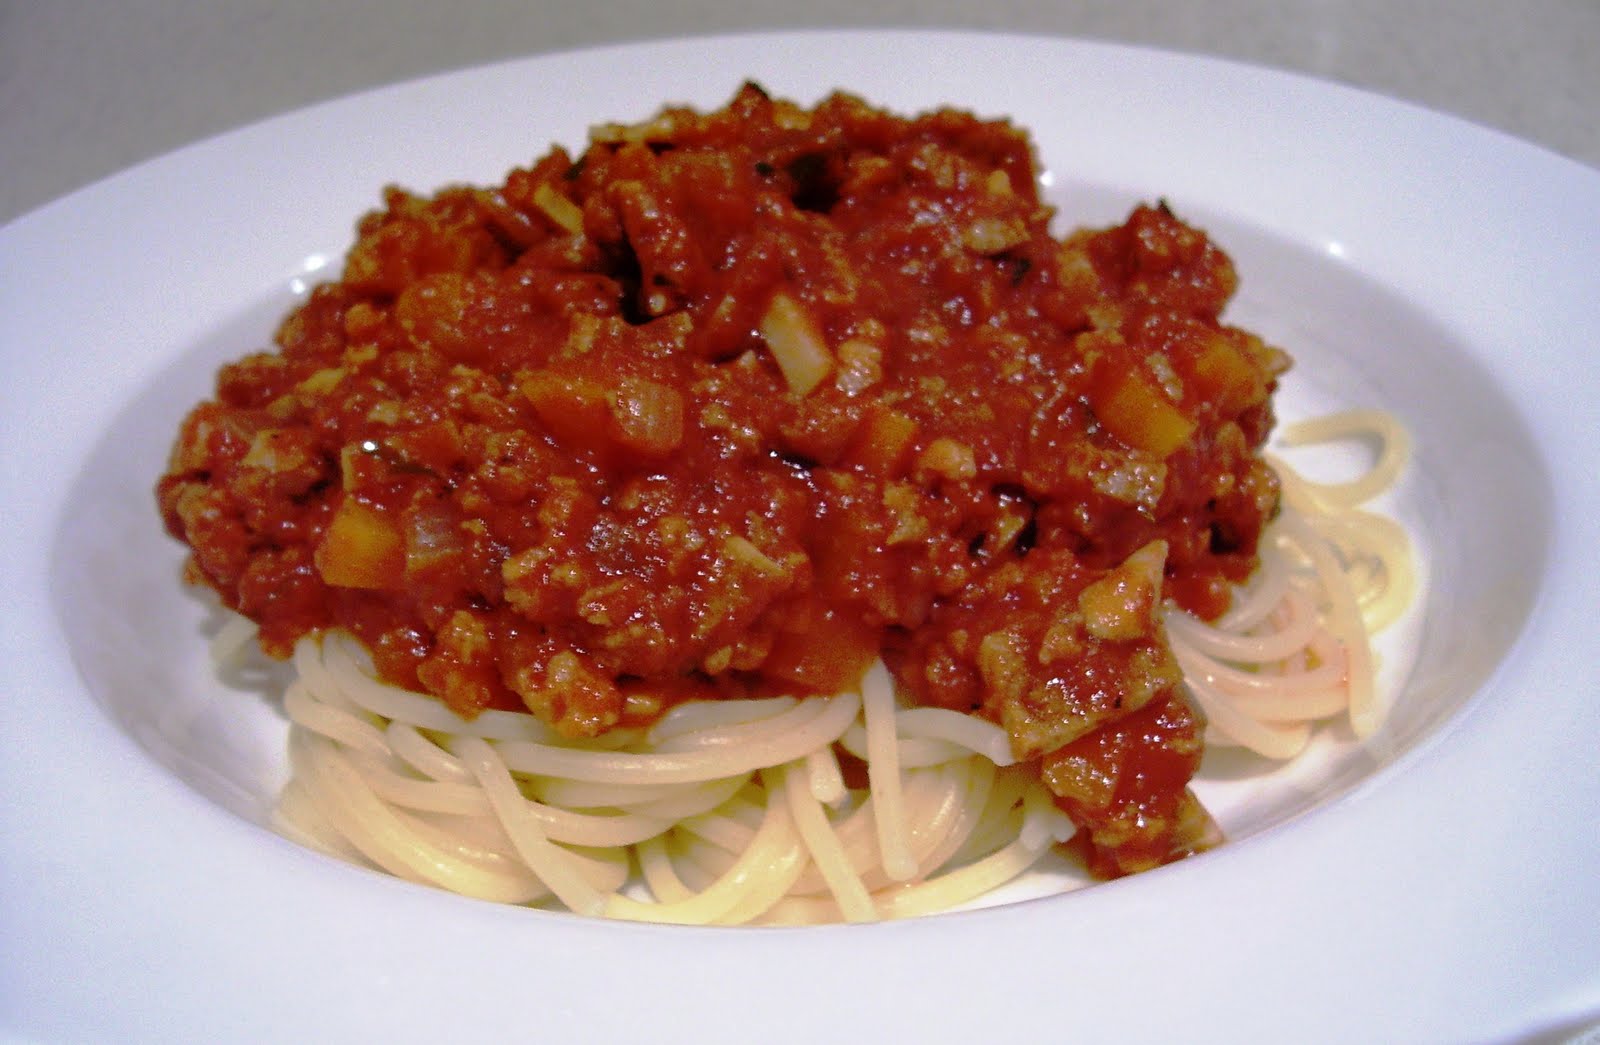 Veganise This!: Spaghetti bolognese with tofu bacon